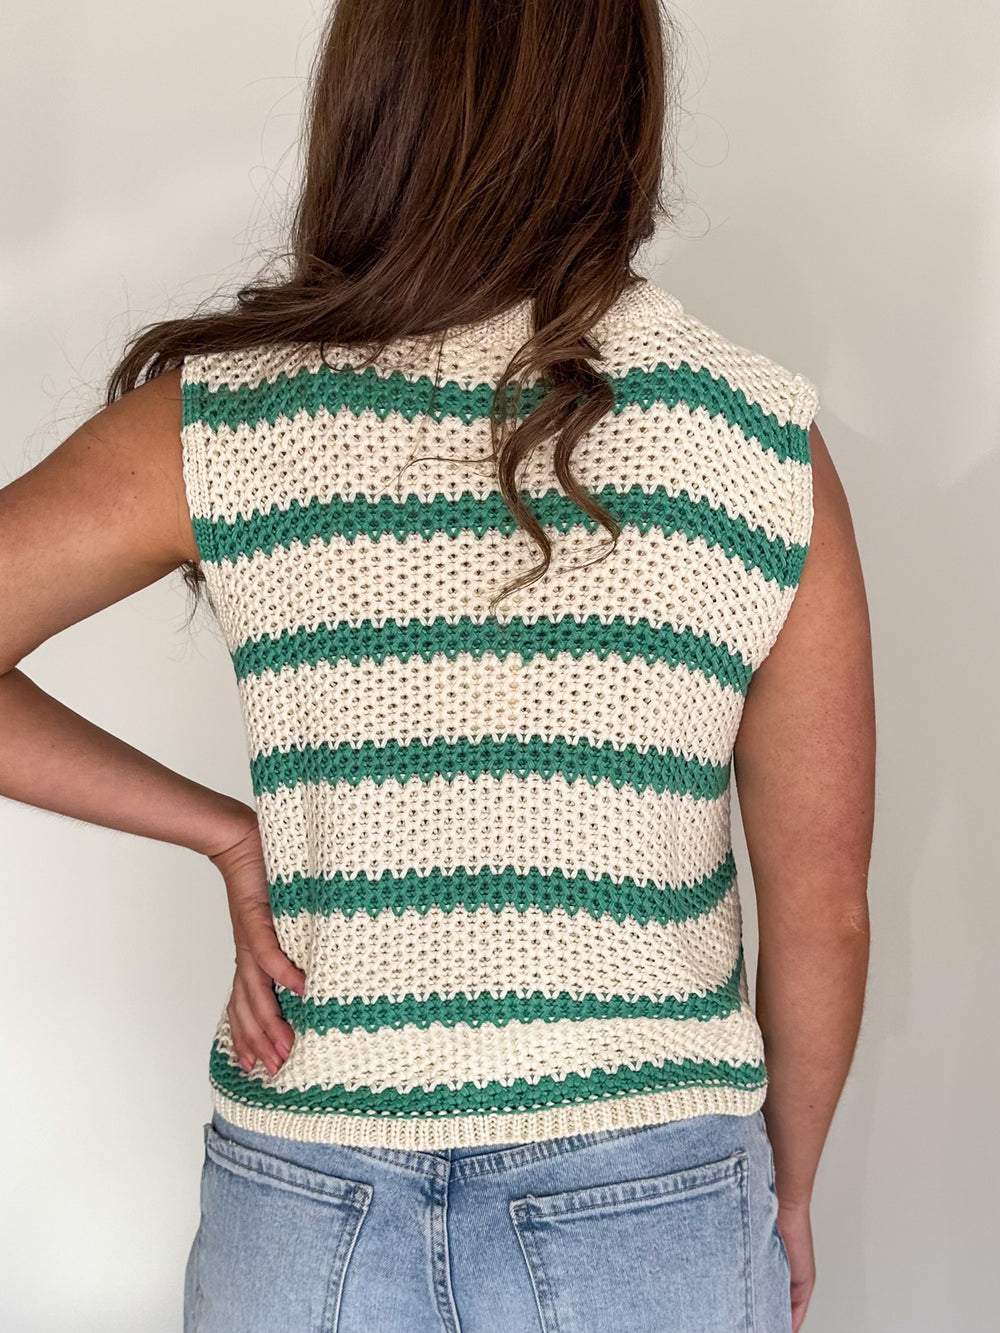 South Of The City Lights Sweater Tank